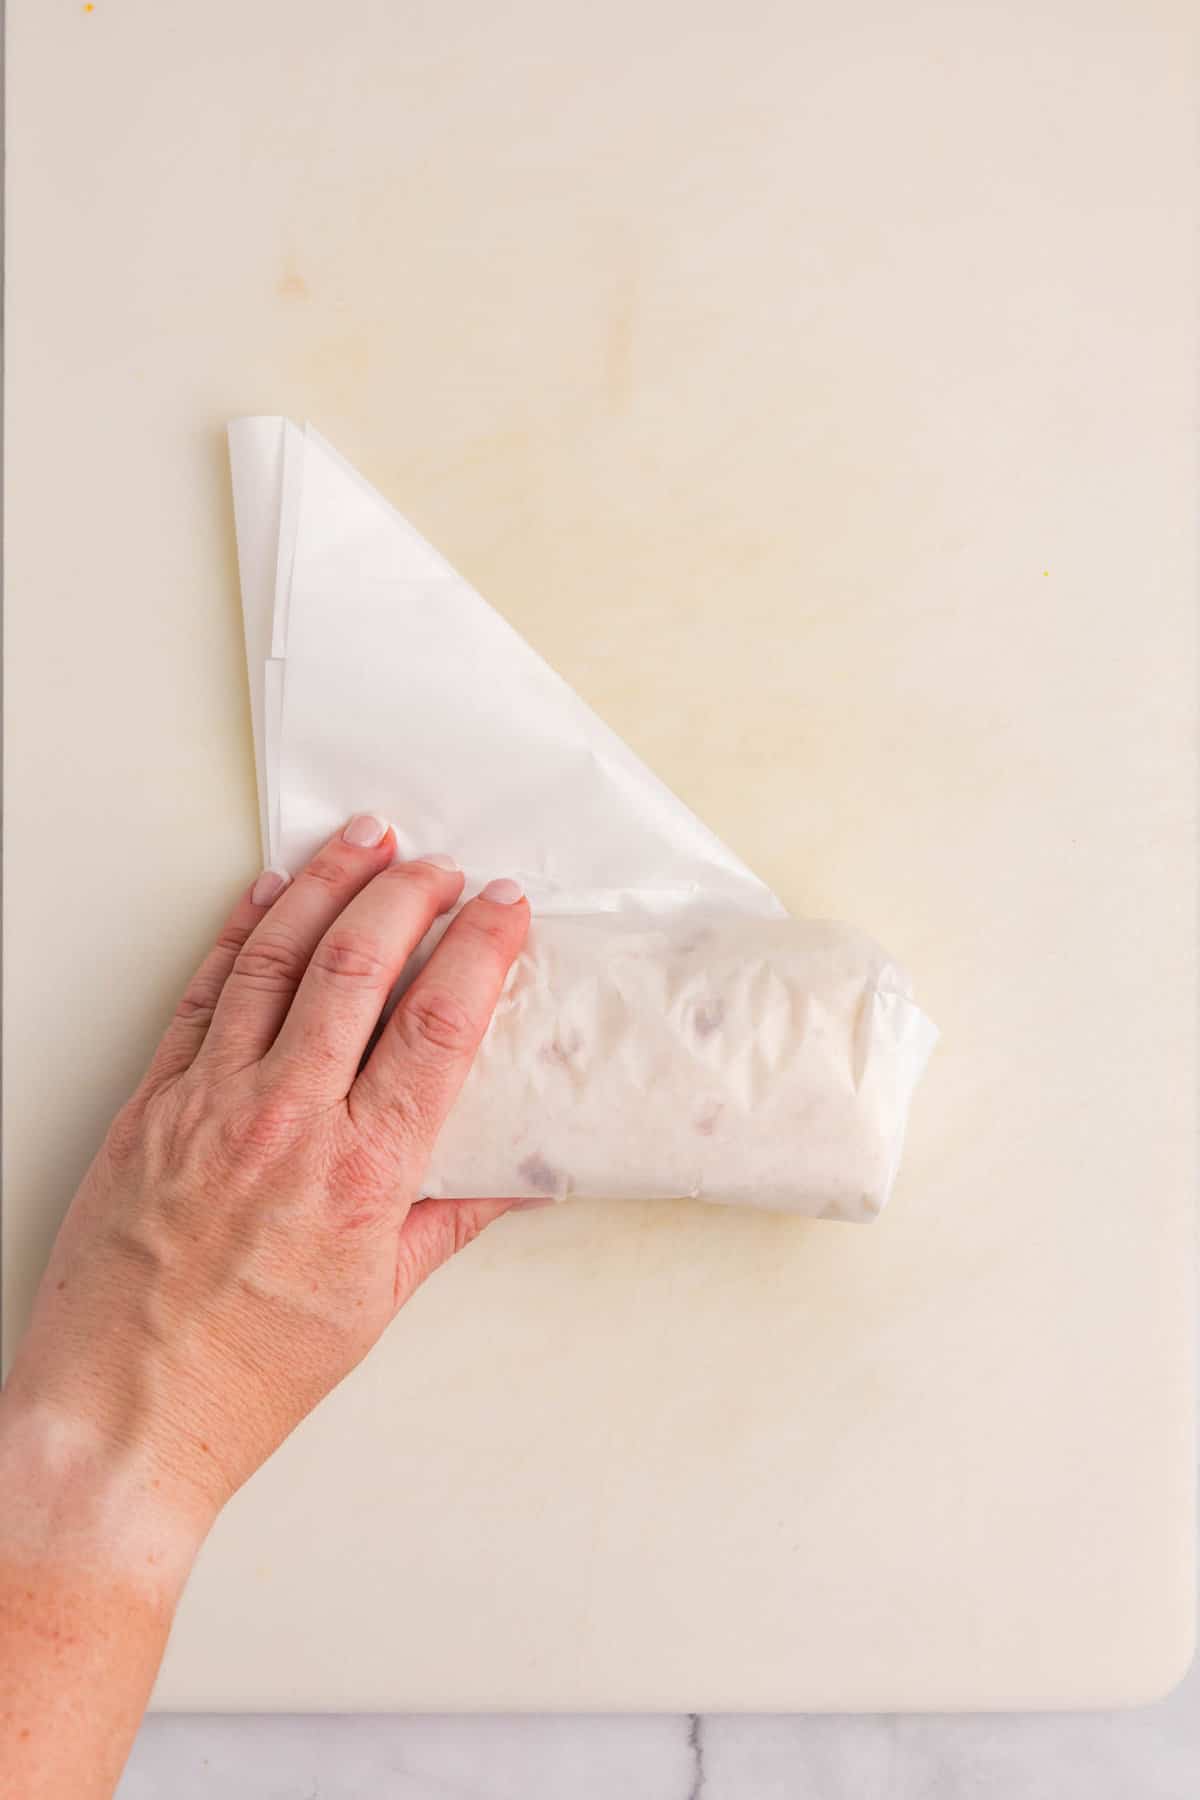 Wrapping breakfast burrito in parchment paper